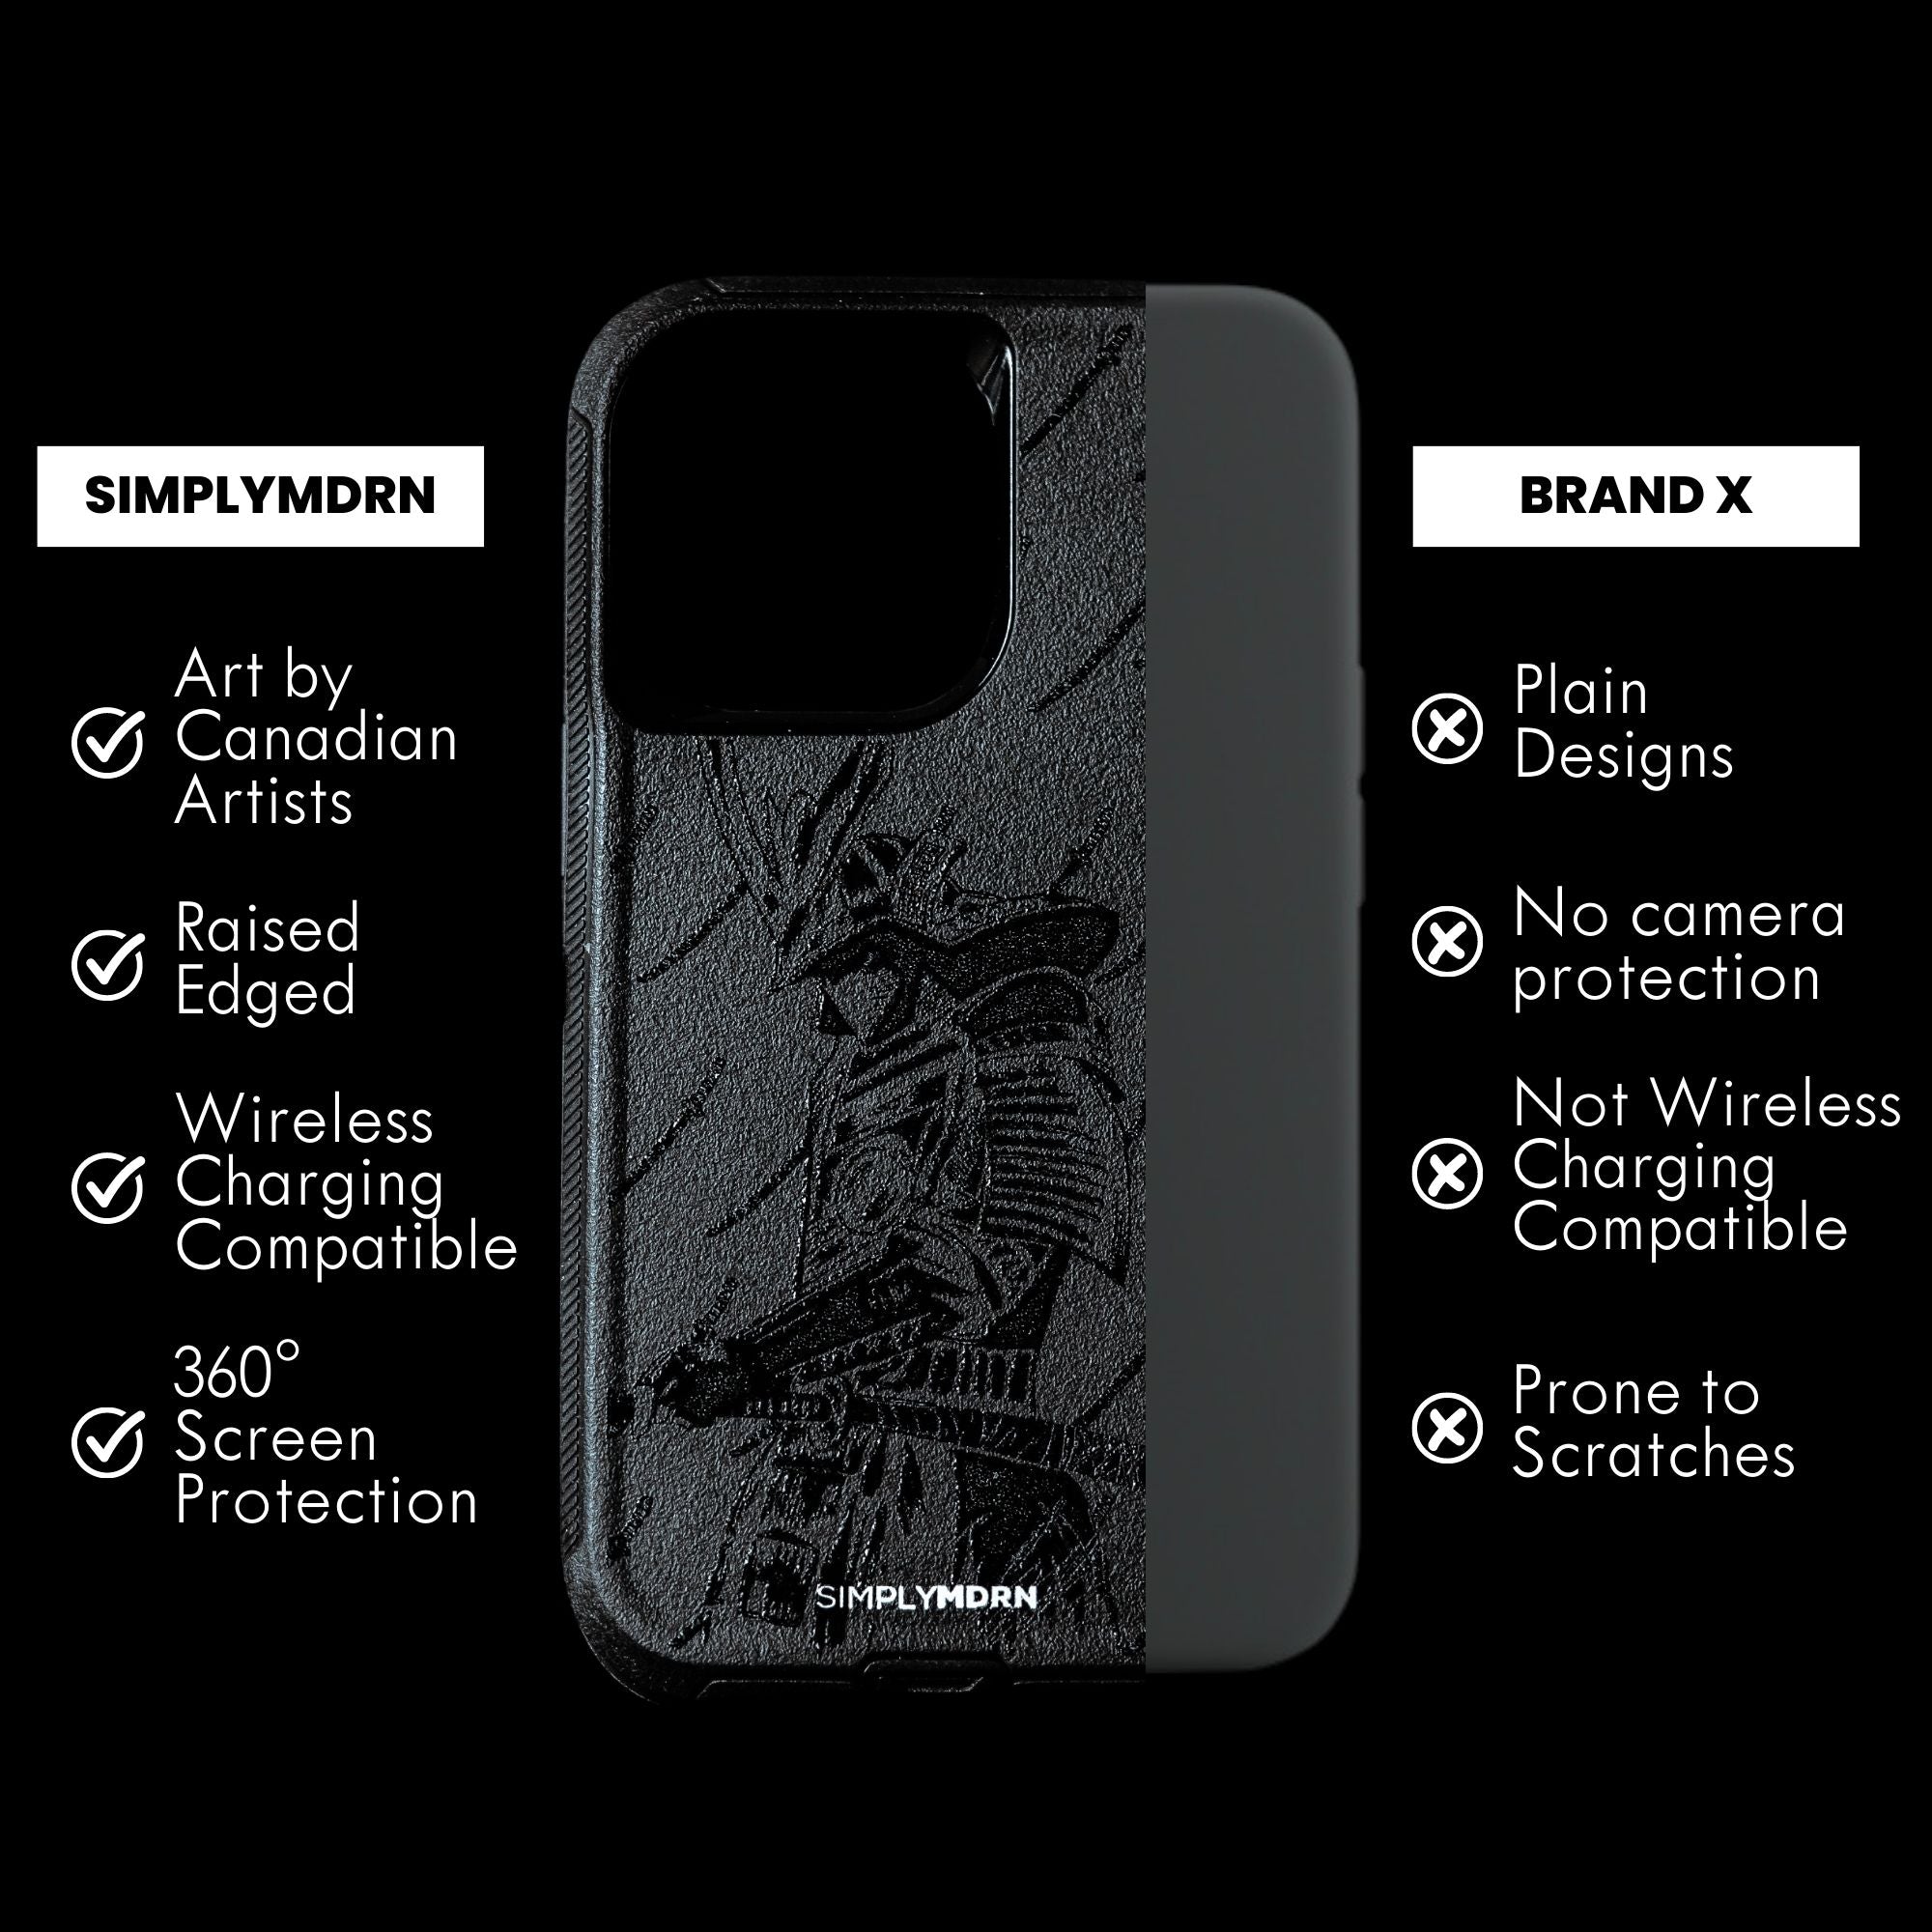 RONIN Armored iPhone Case